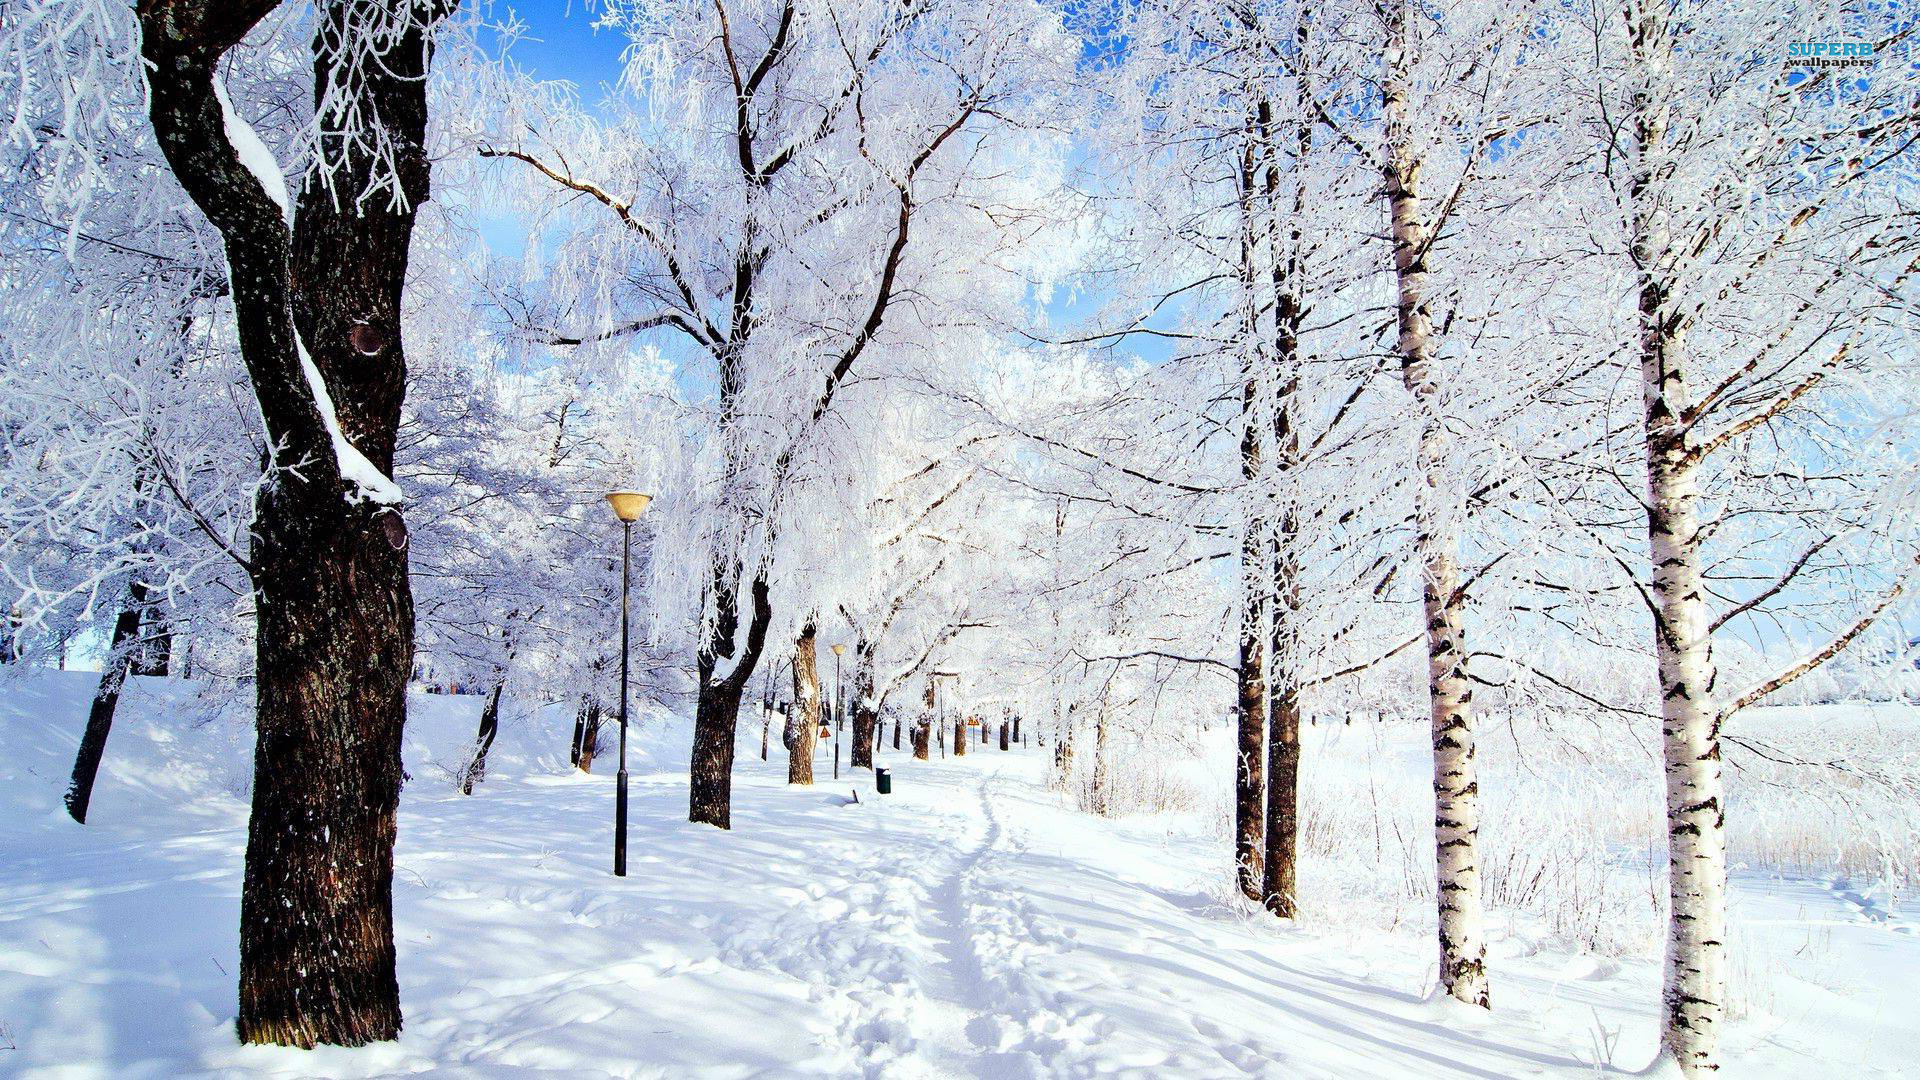 snow images Snow in Winter HD wallpaper and background photos (36241636)